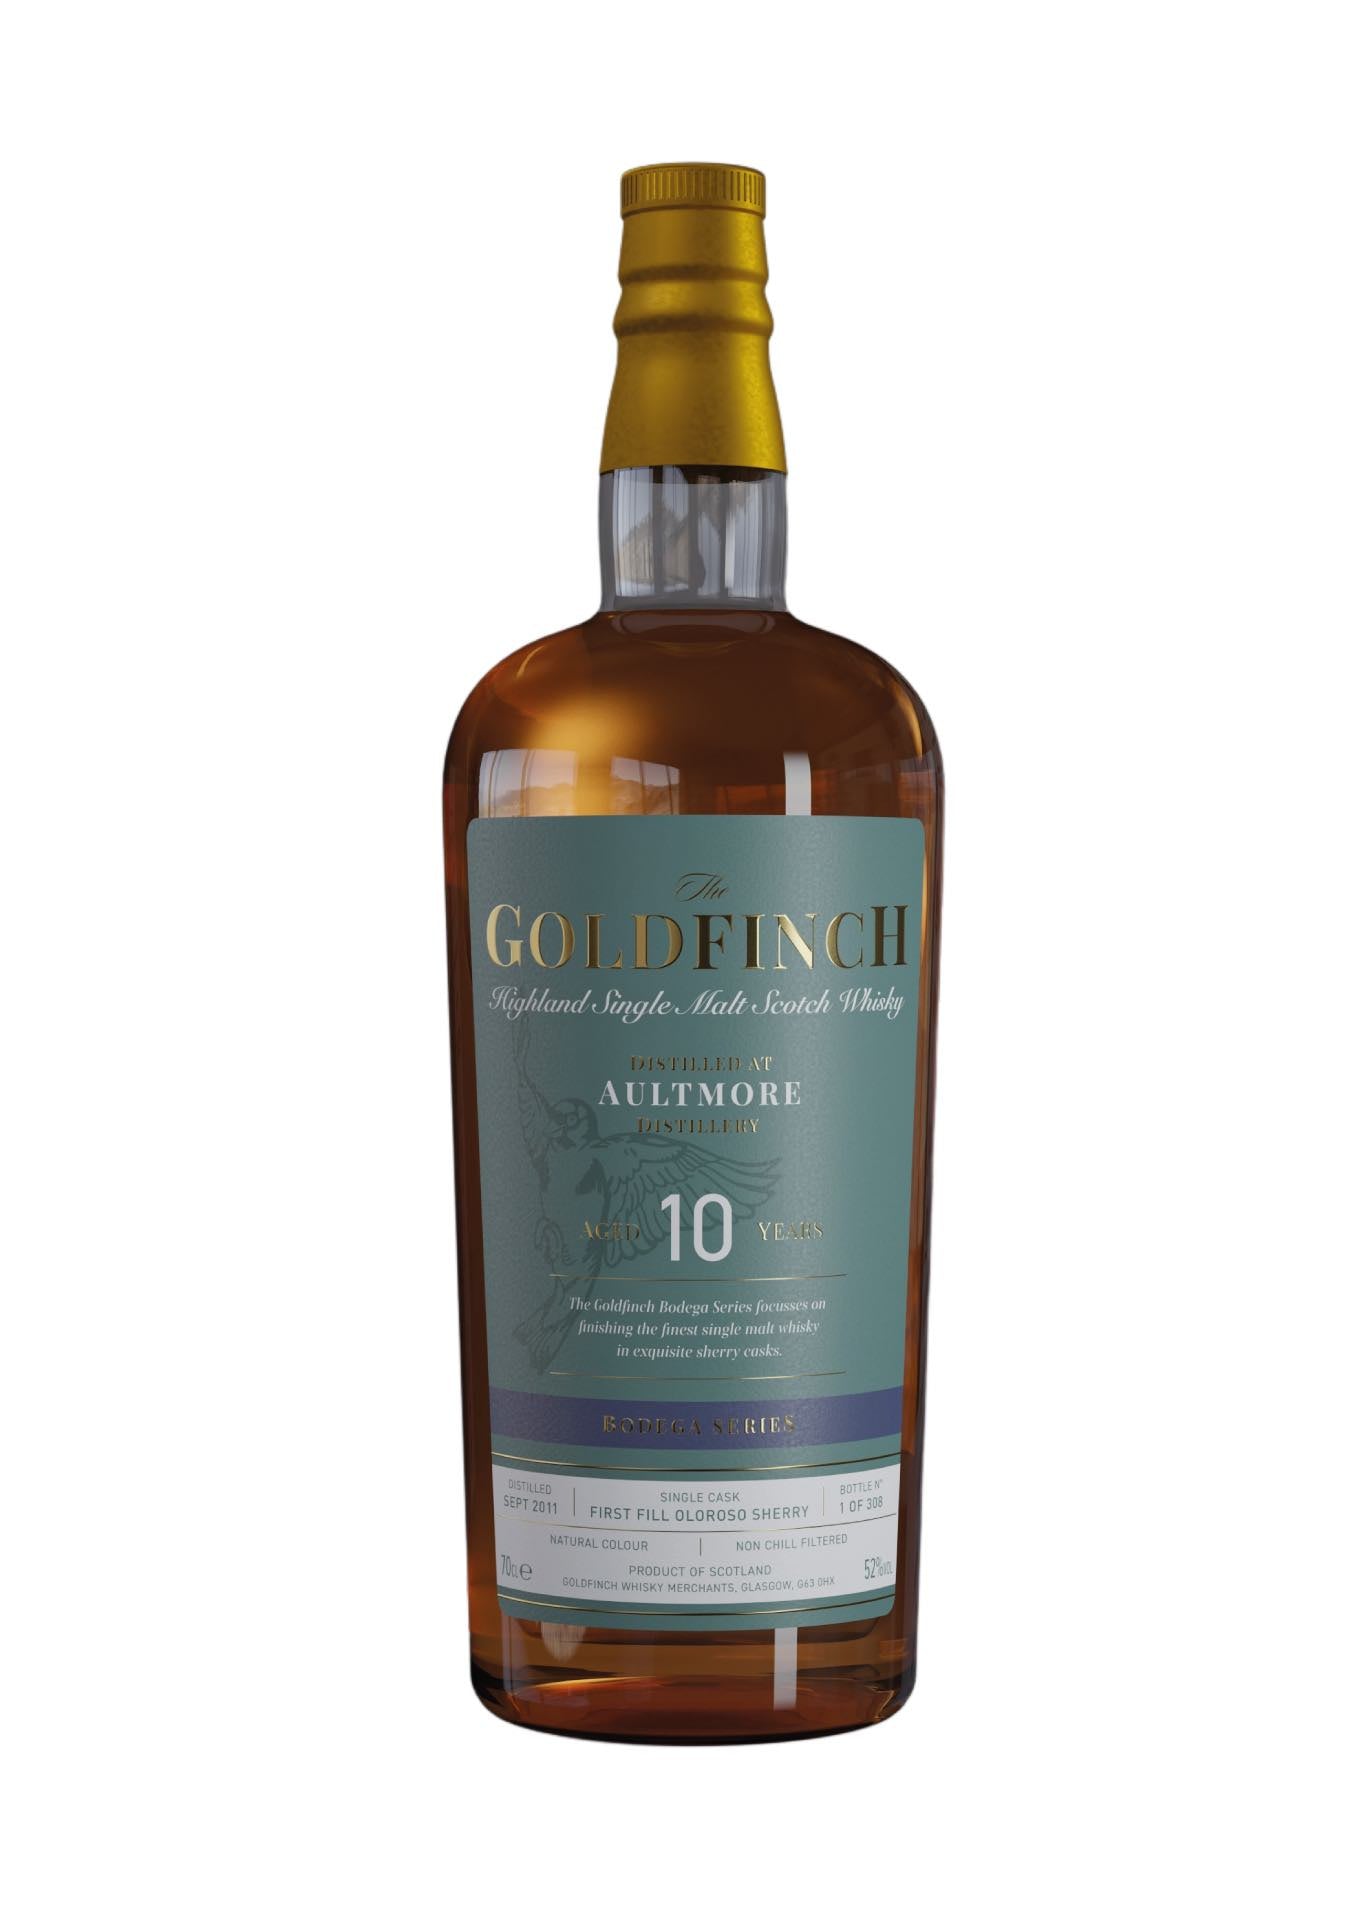 Goldfinch Aultmore 10 Year Old Single Cask Whisky